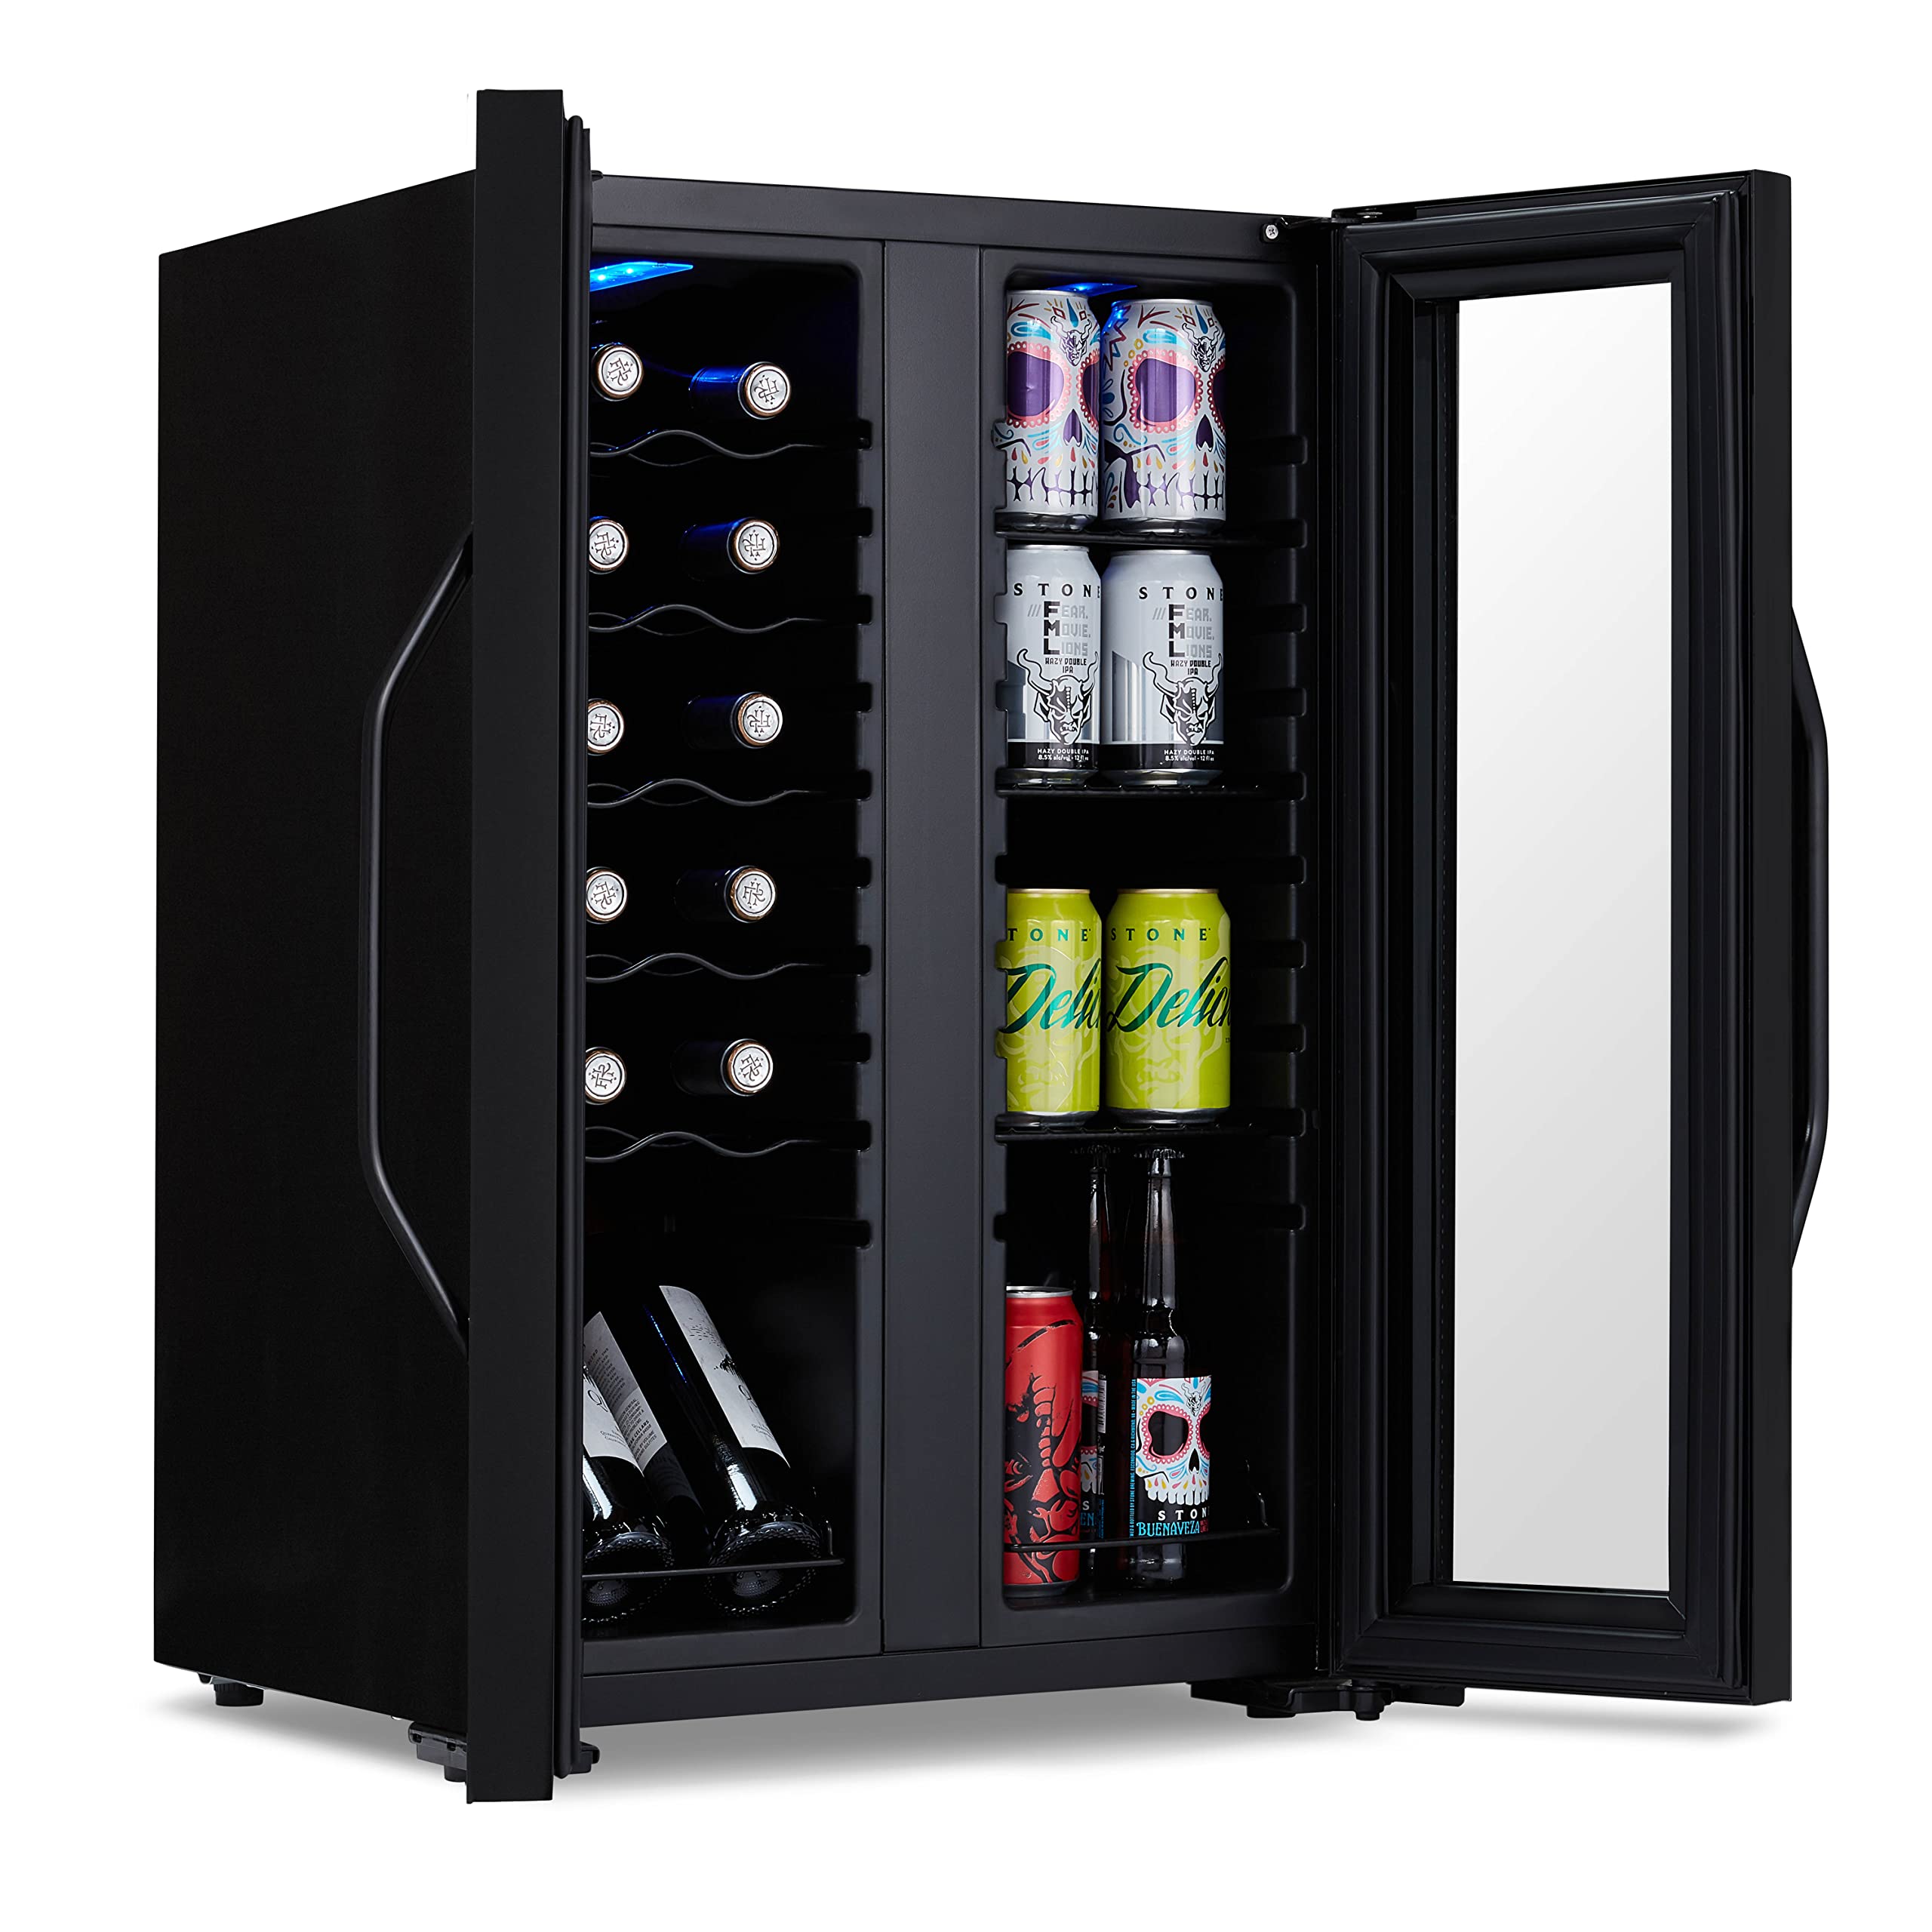 NewAir 12 Bottle/ 39 Can Wine Cooler Refrigerator | Shadow Series | Dual Temperature Zones, Freestanding Mirrored Wine and Beverage Fridge with Double-Layer Tempered Glass Door & Compressor Cooling